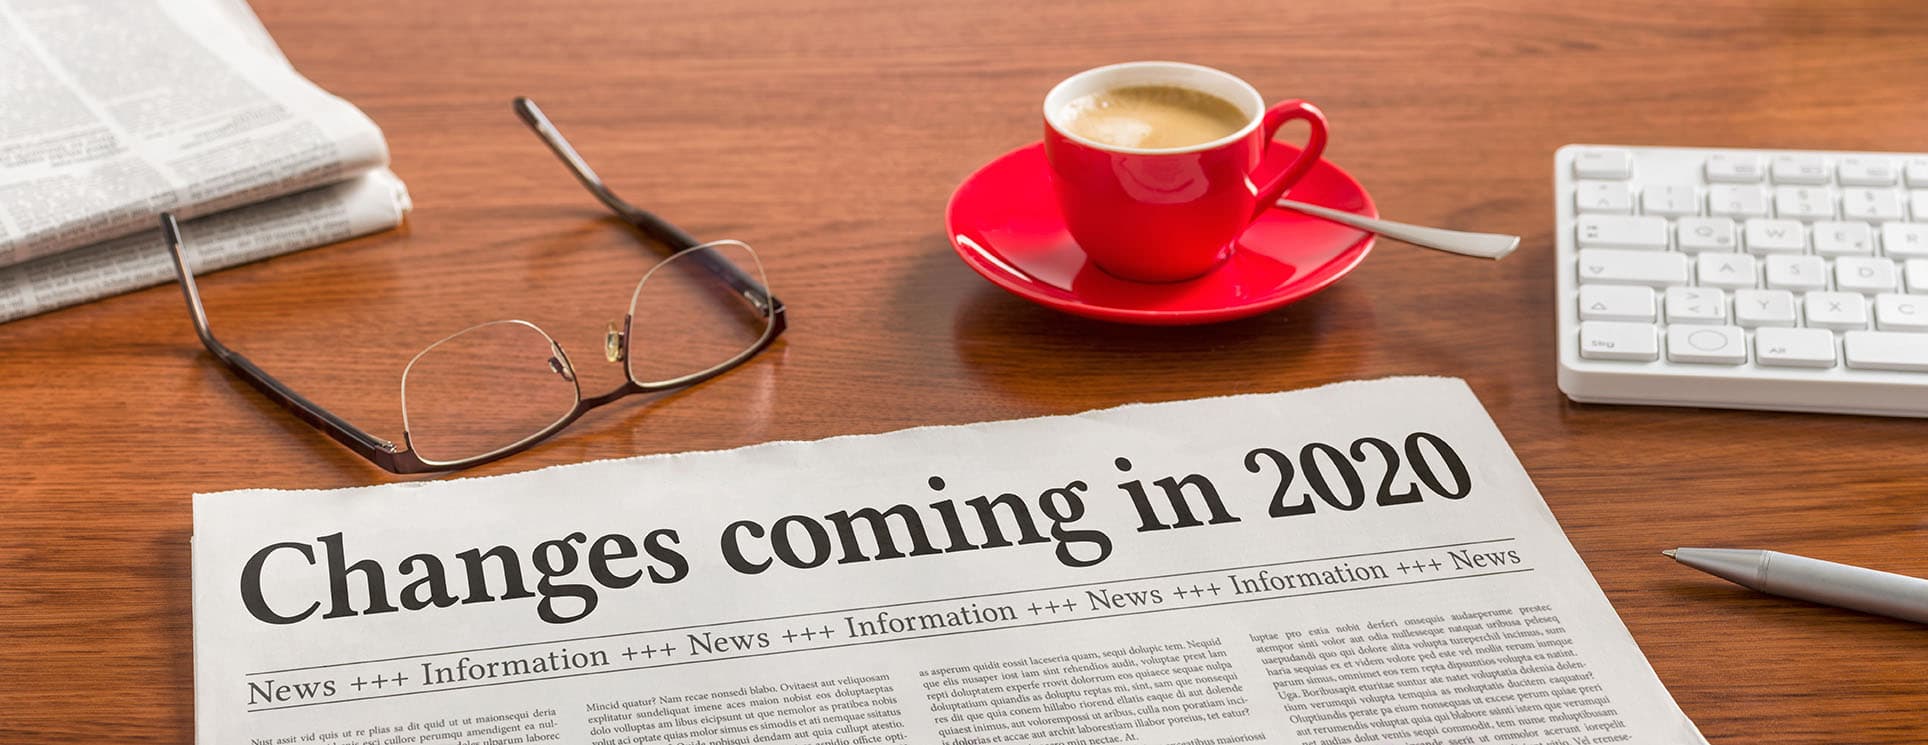 Newspaper with headline Changes Coming in 2020